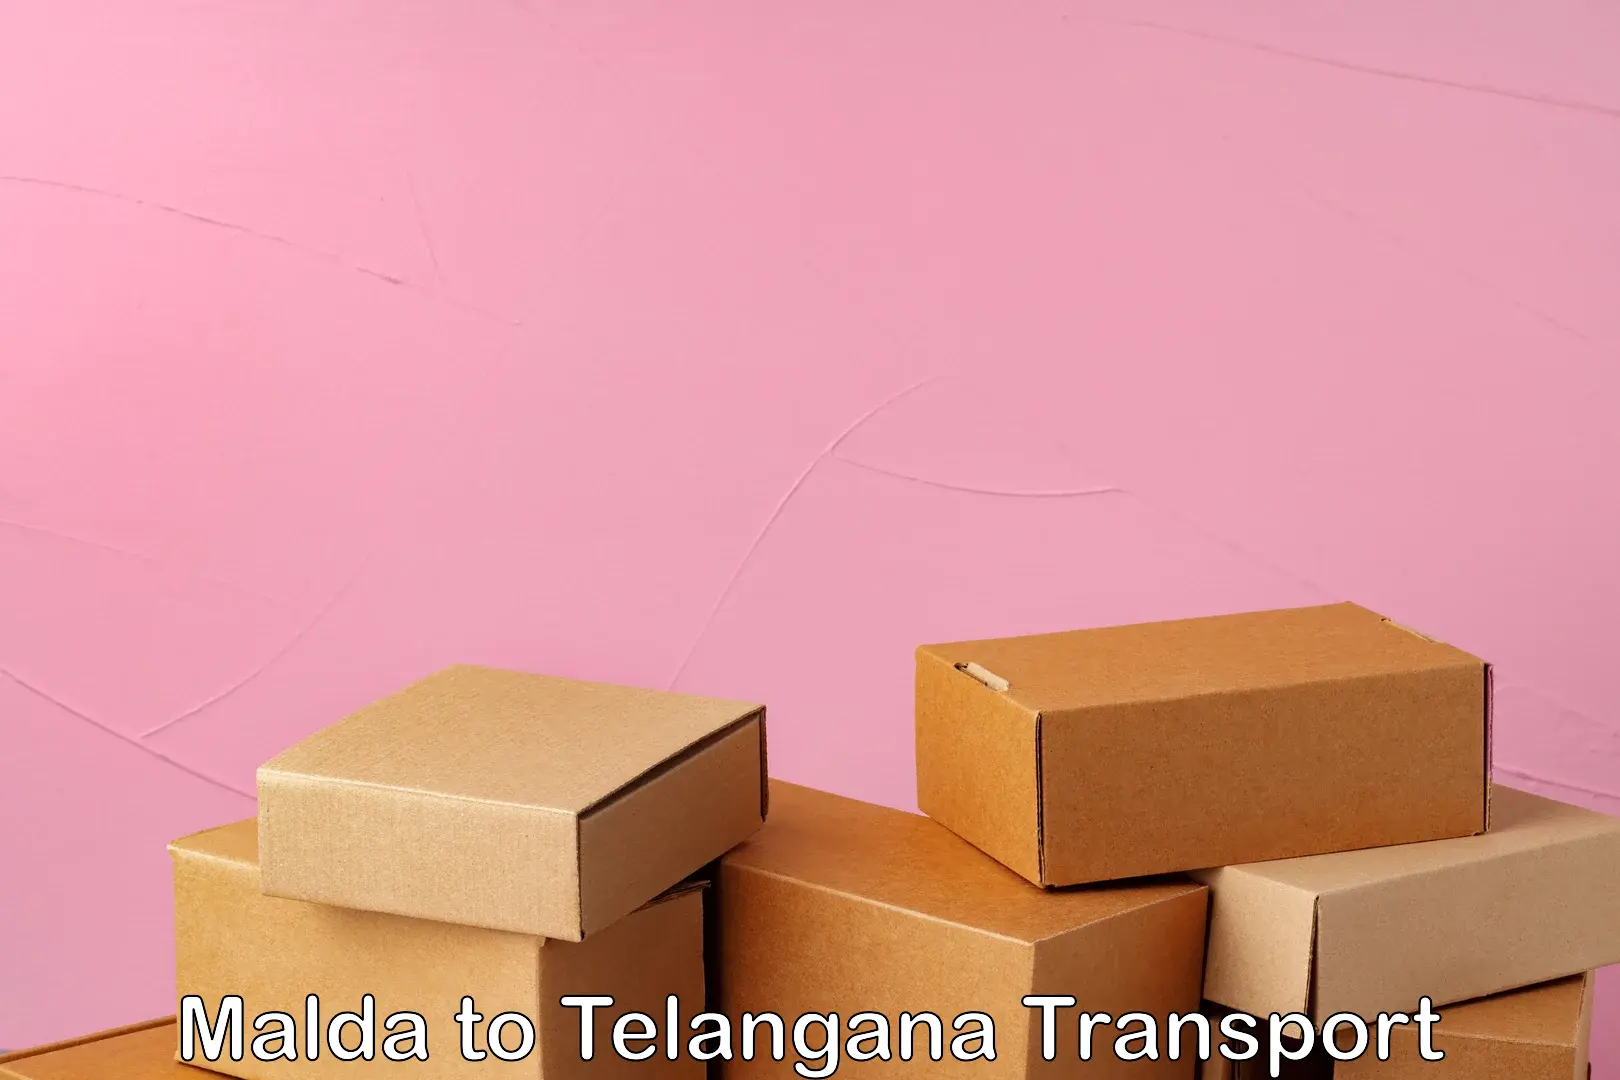 Commercial transport service in Malda to Ramagundam